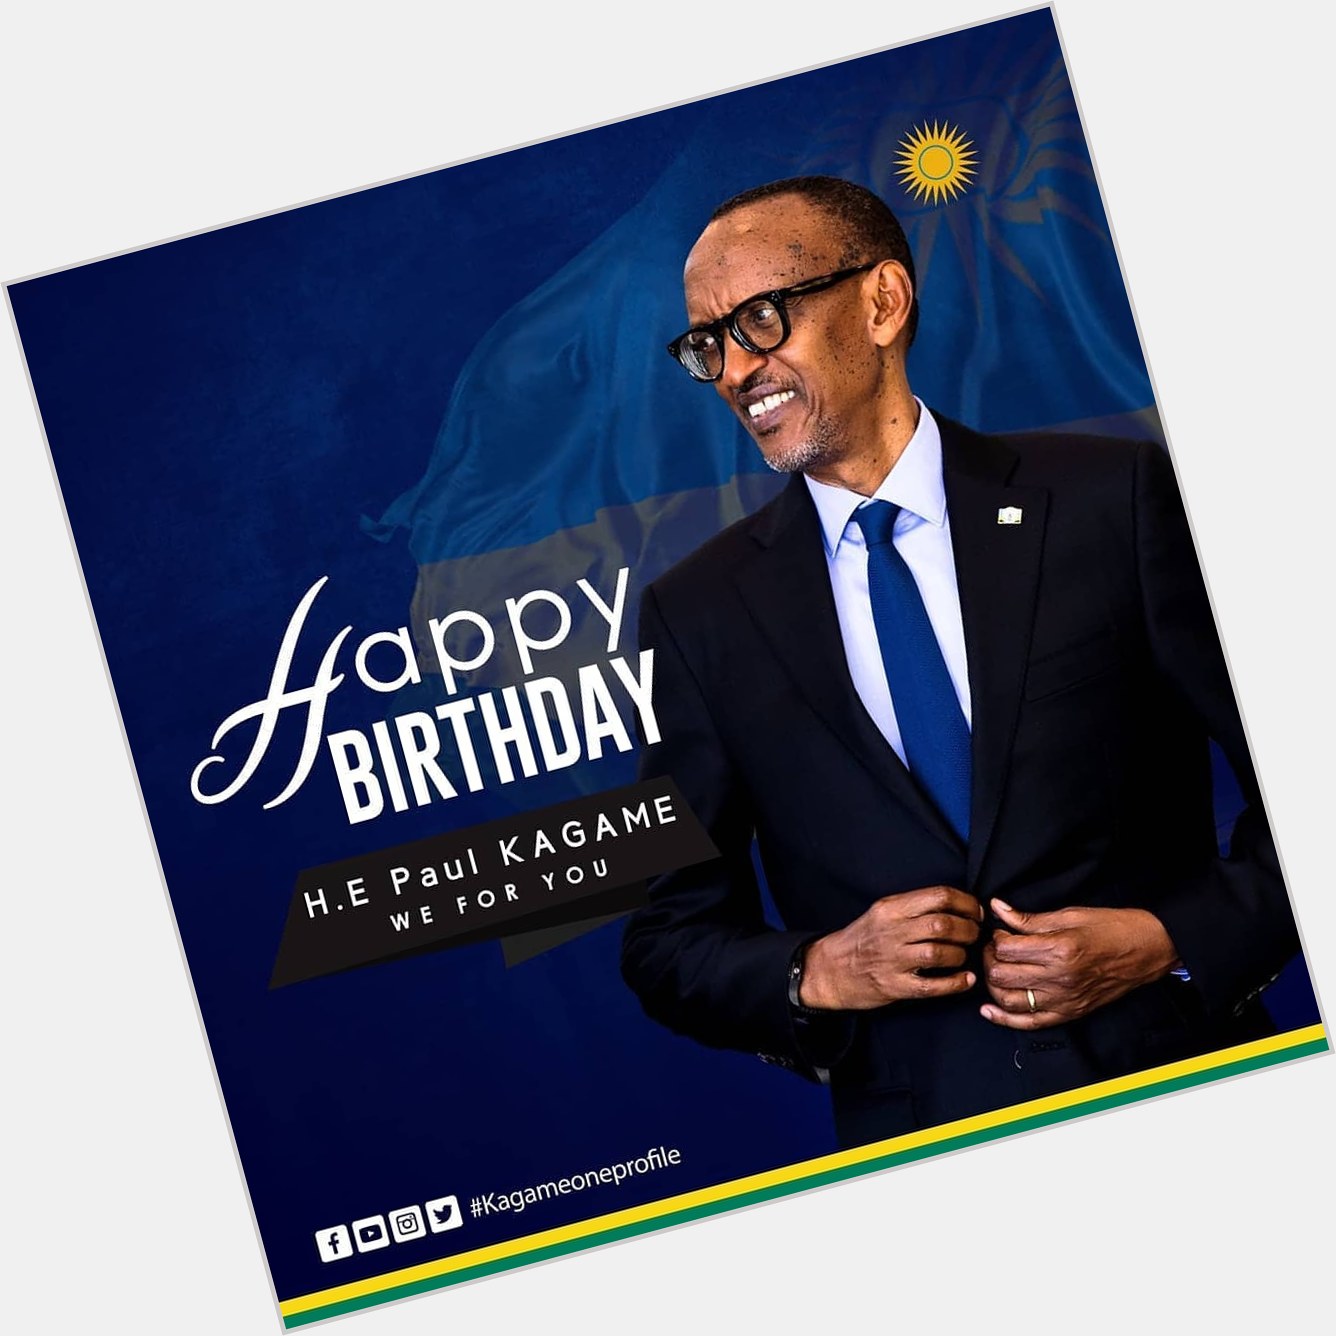 Happy blessed birthday to our H.E Paul Kagame          